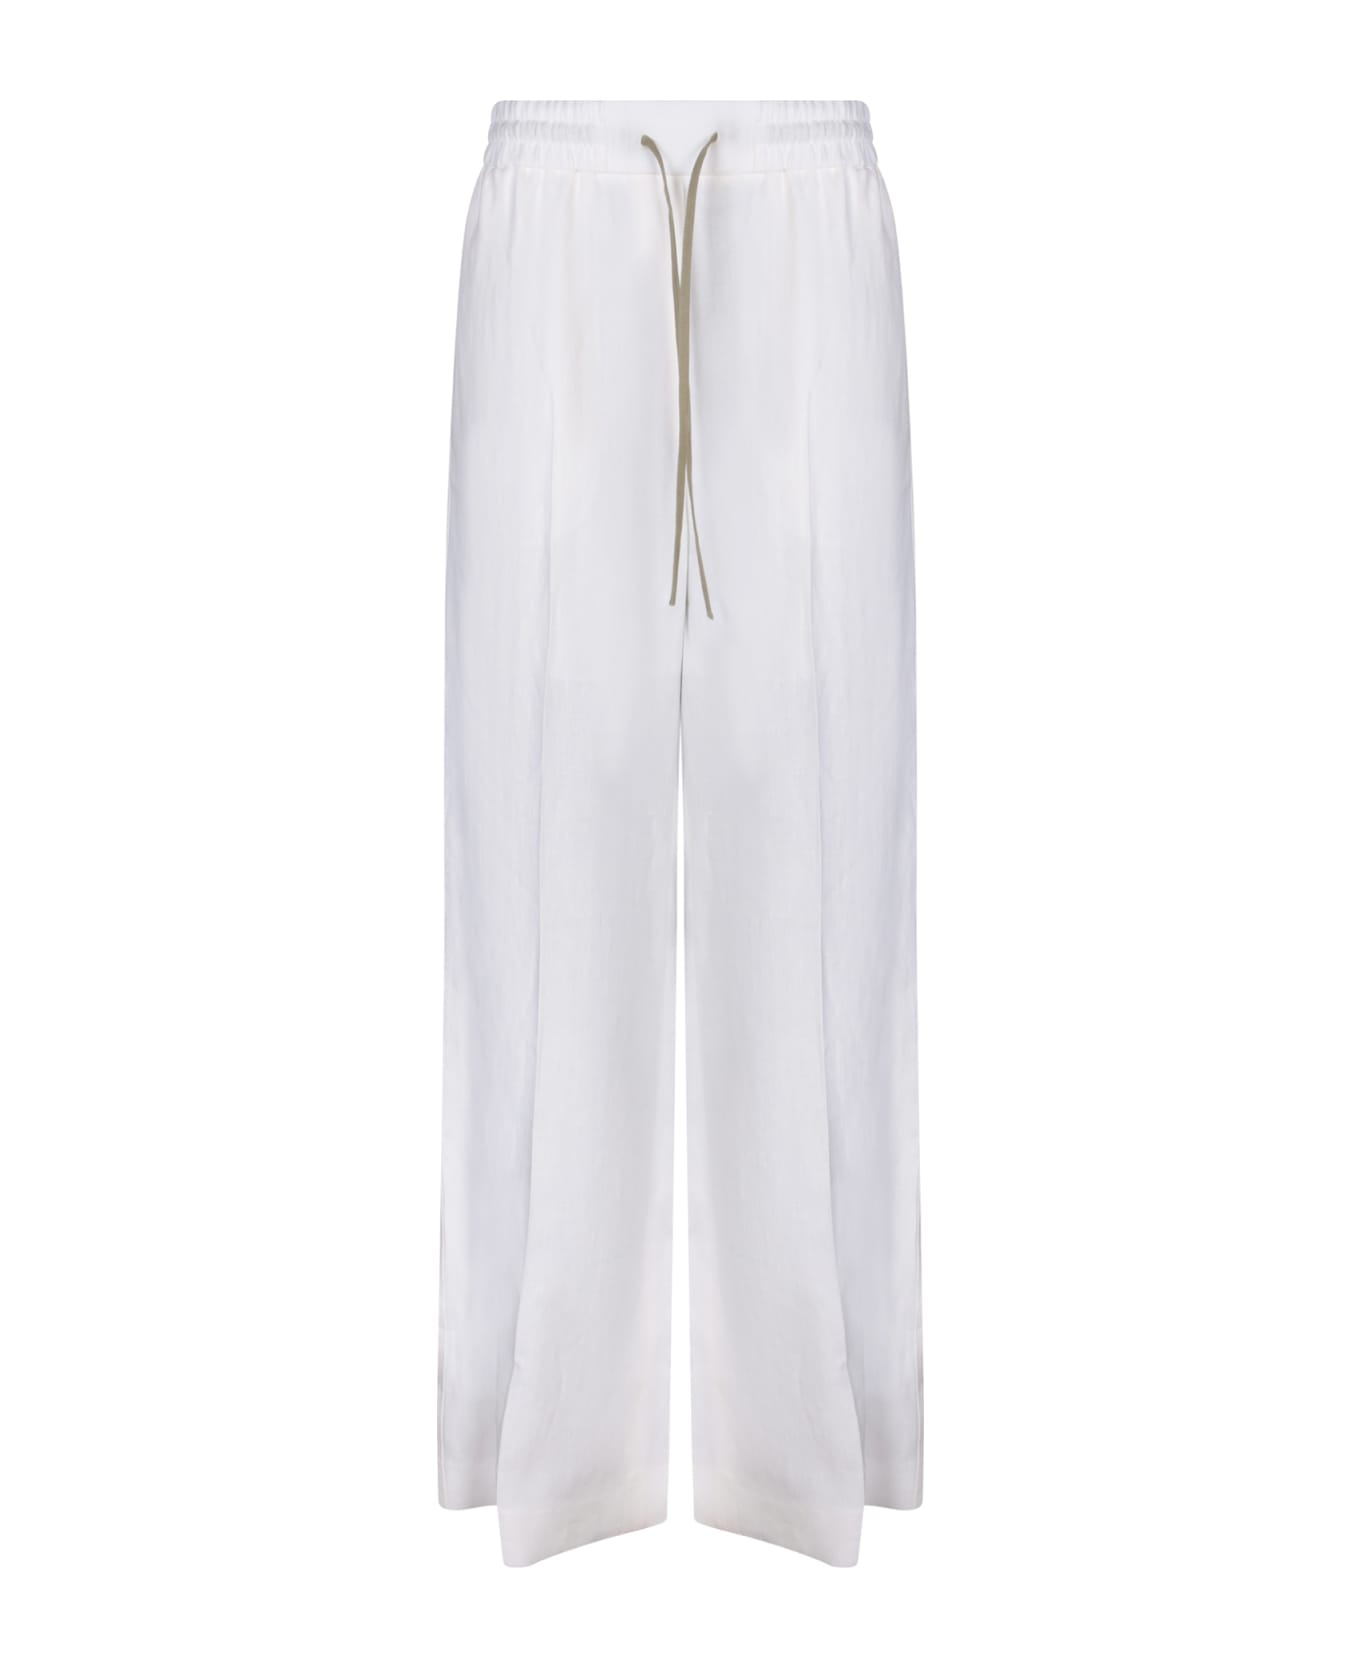 Paul Smith Wide-fit Cream Trousers - White